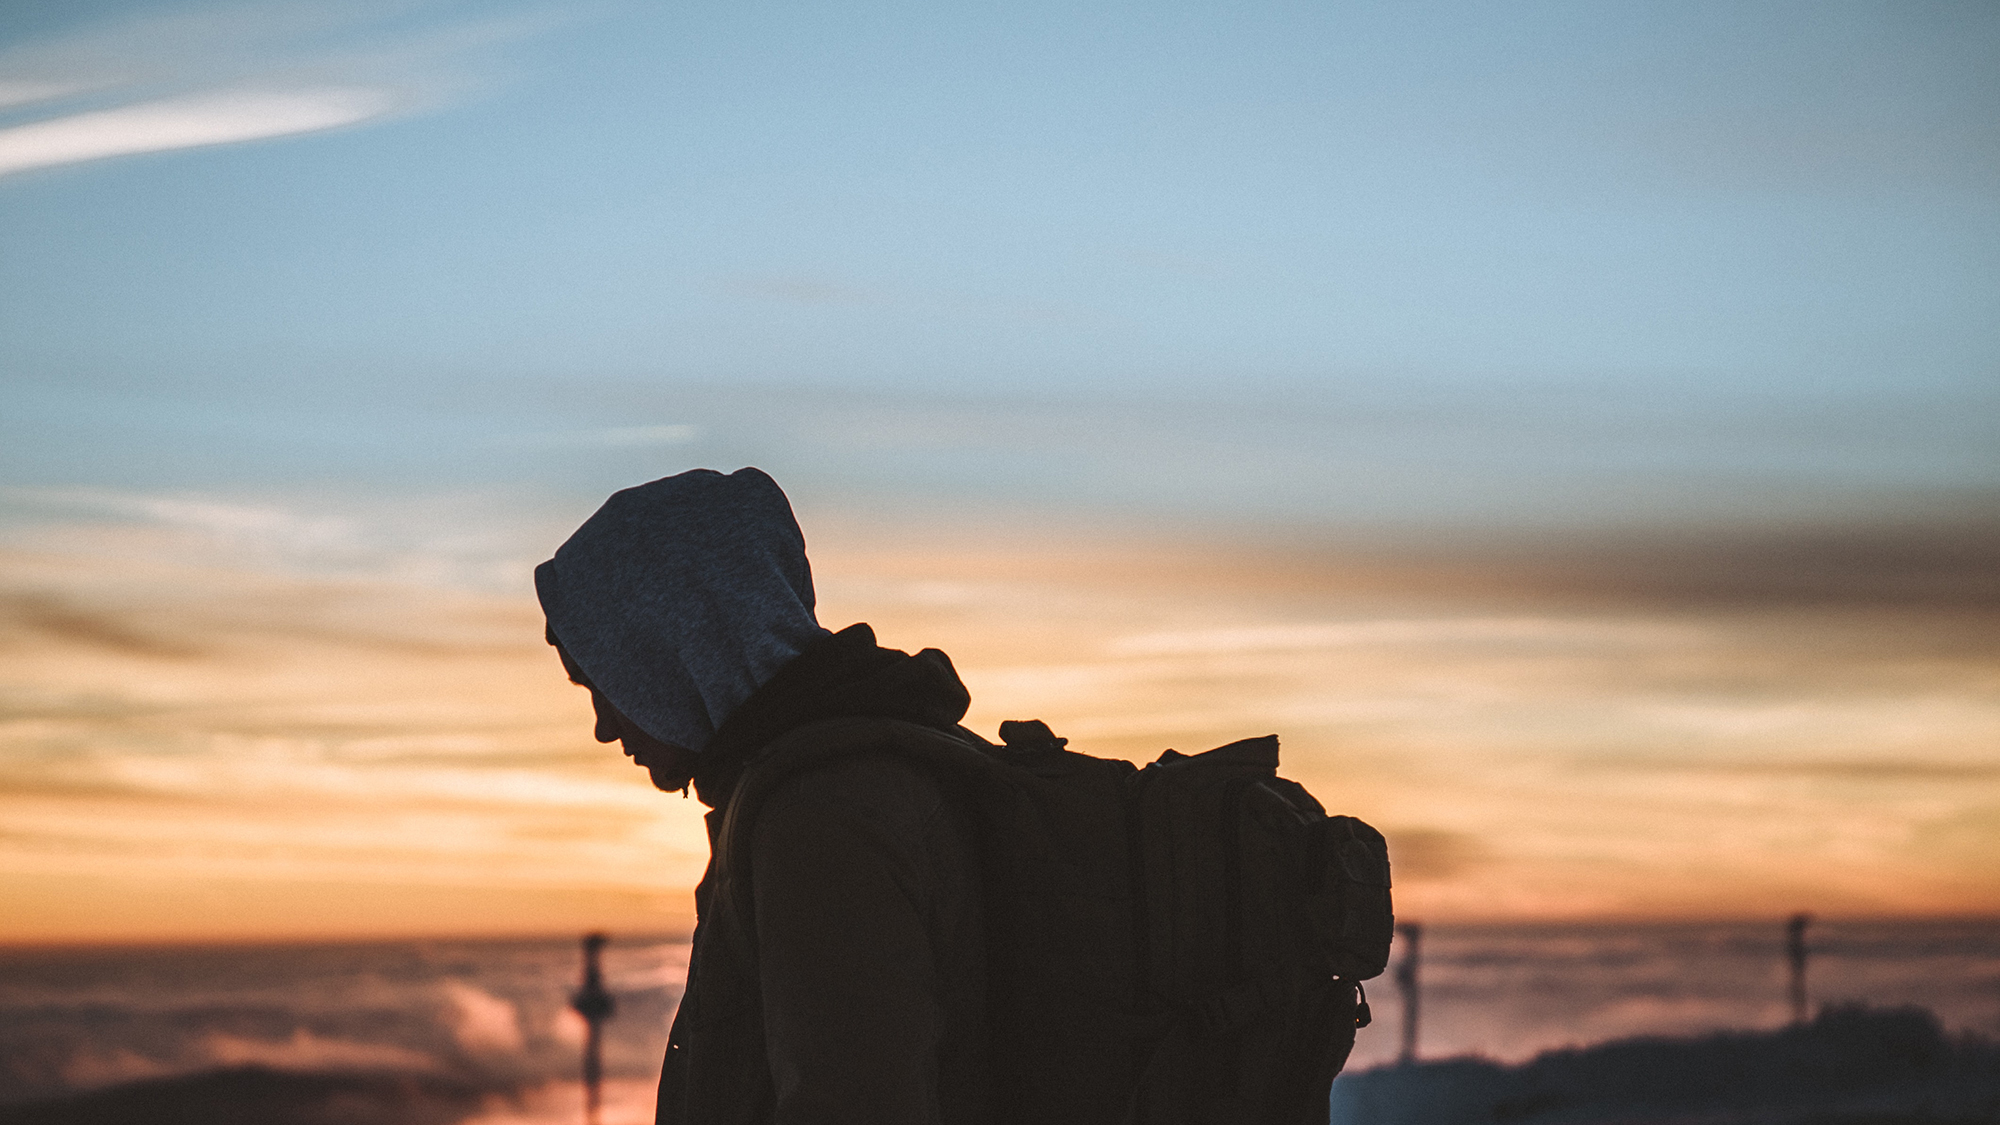 profile of a person wearing a hoodie and a large backpack against an orange sunset